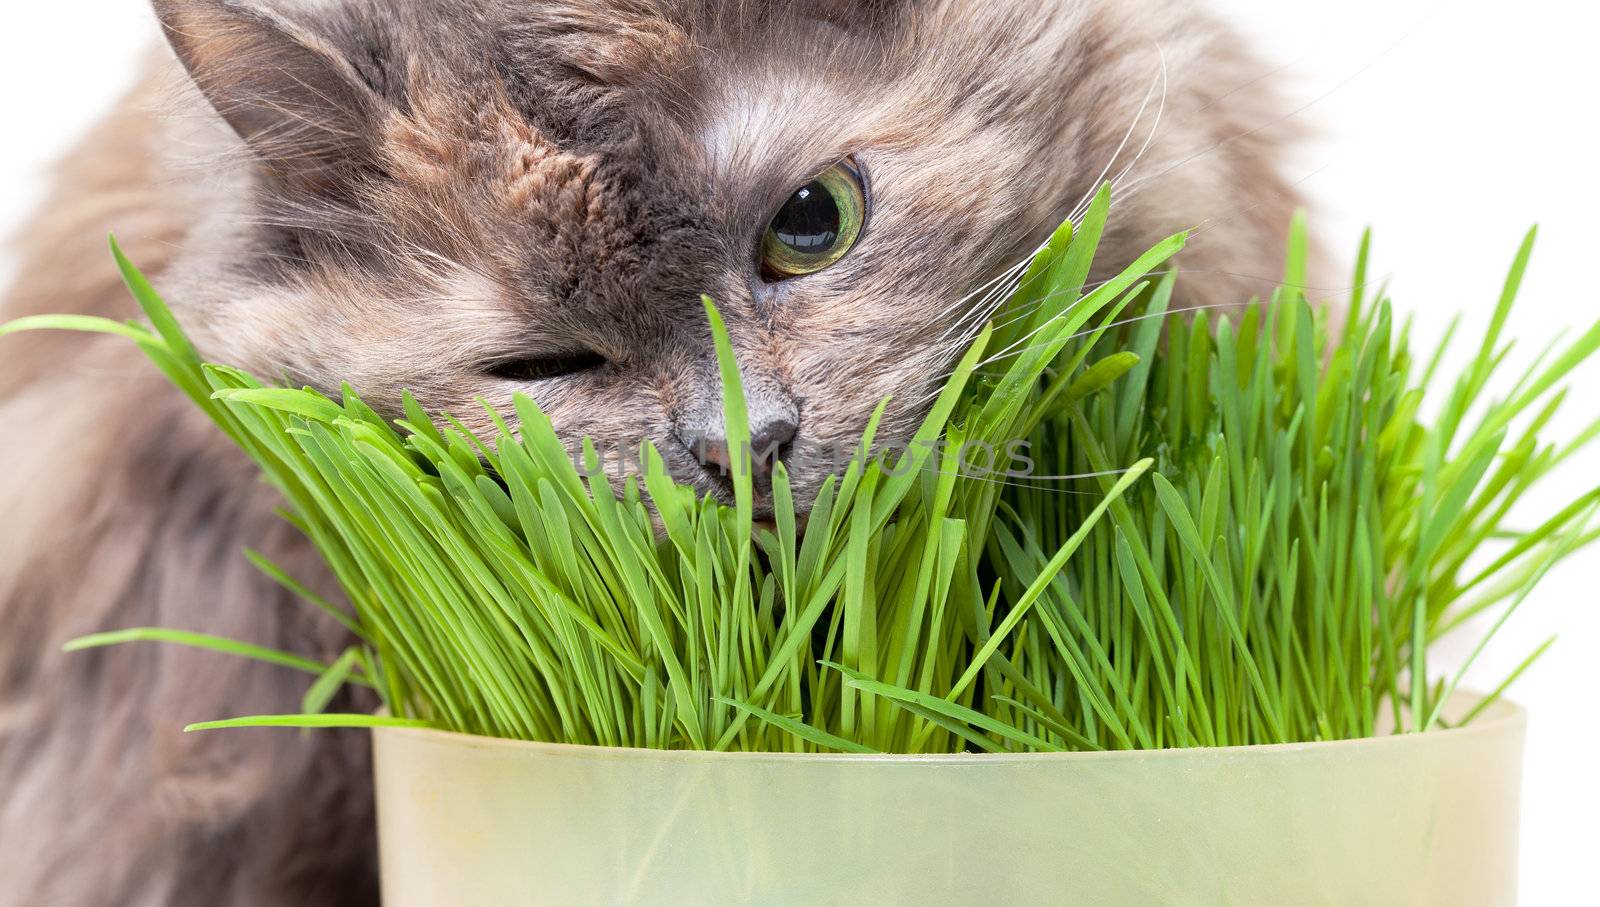 A pet cat eating fresh grass by Discovod